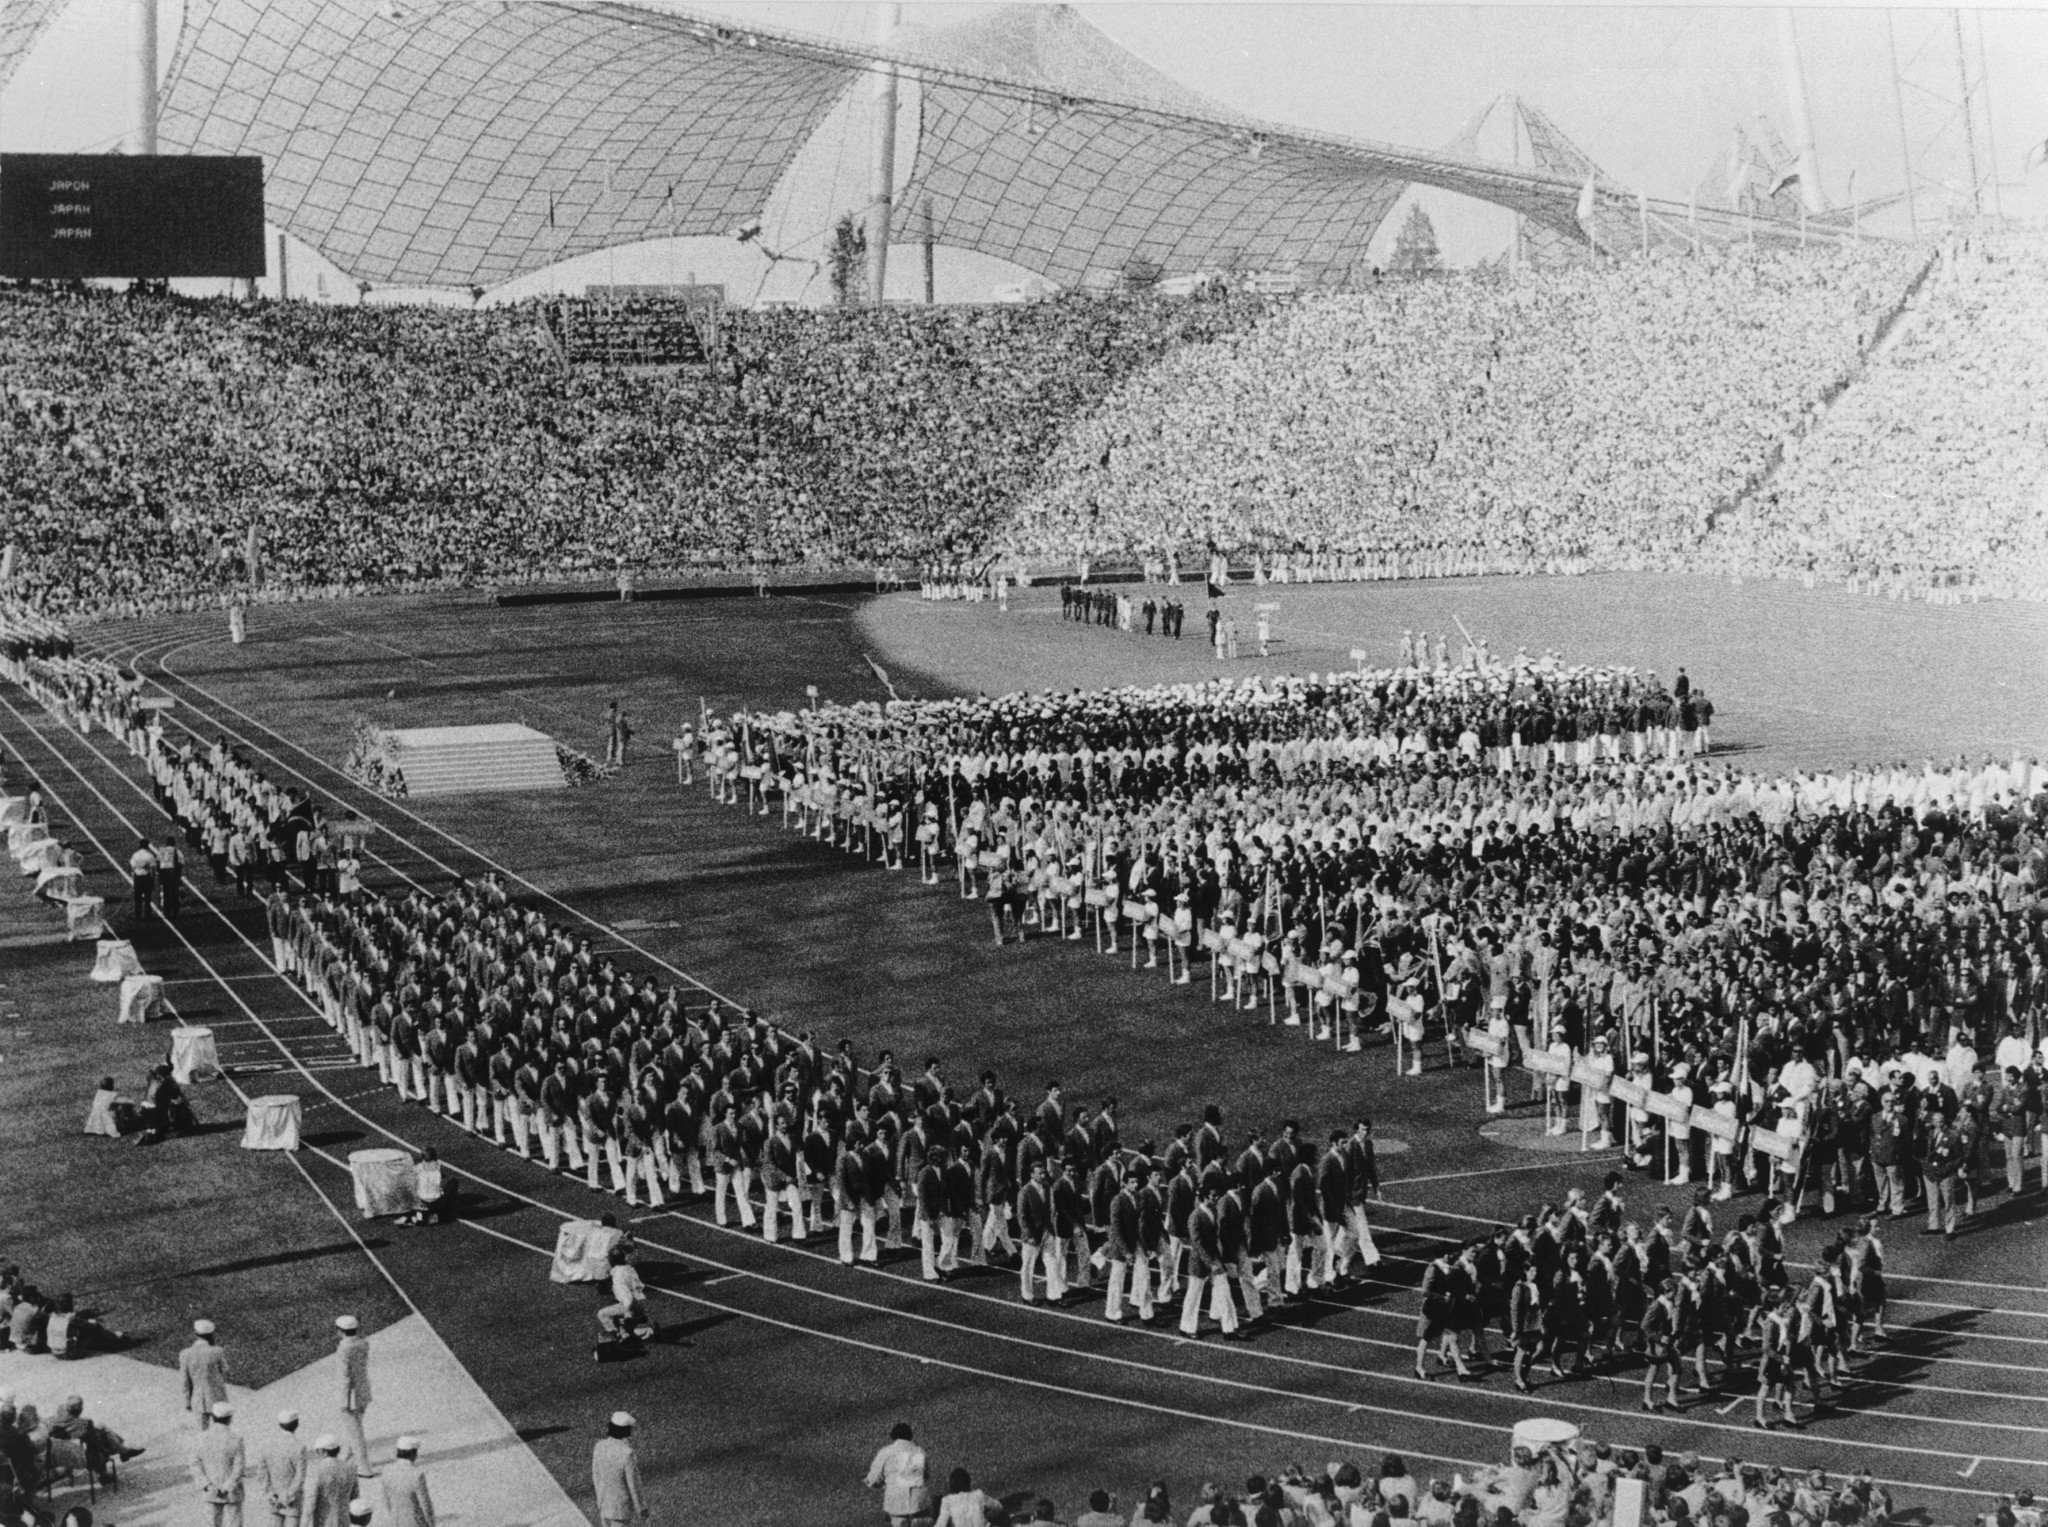 More than 7000 competitors took part in the 1972 Olympics prompting concern that the Games were becoming too big ©Getty Images